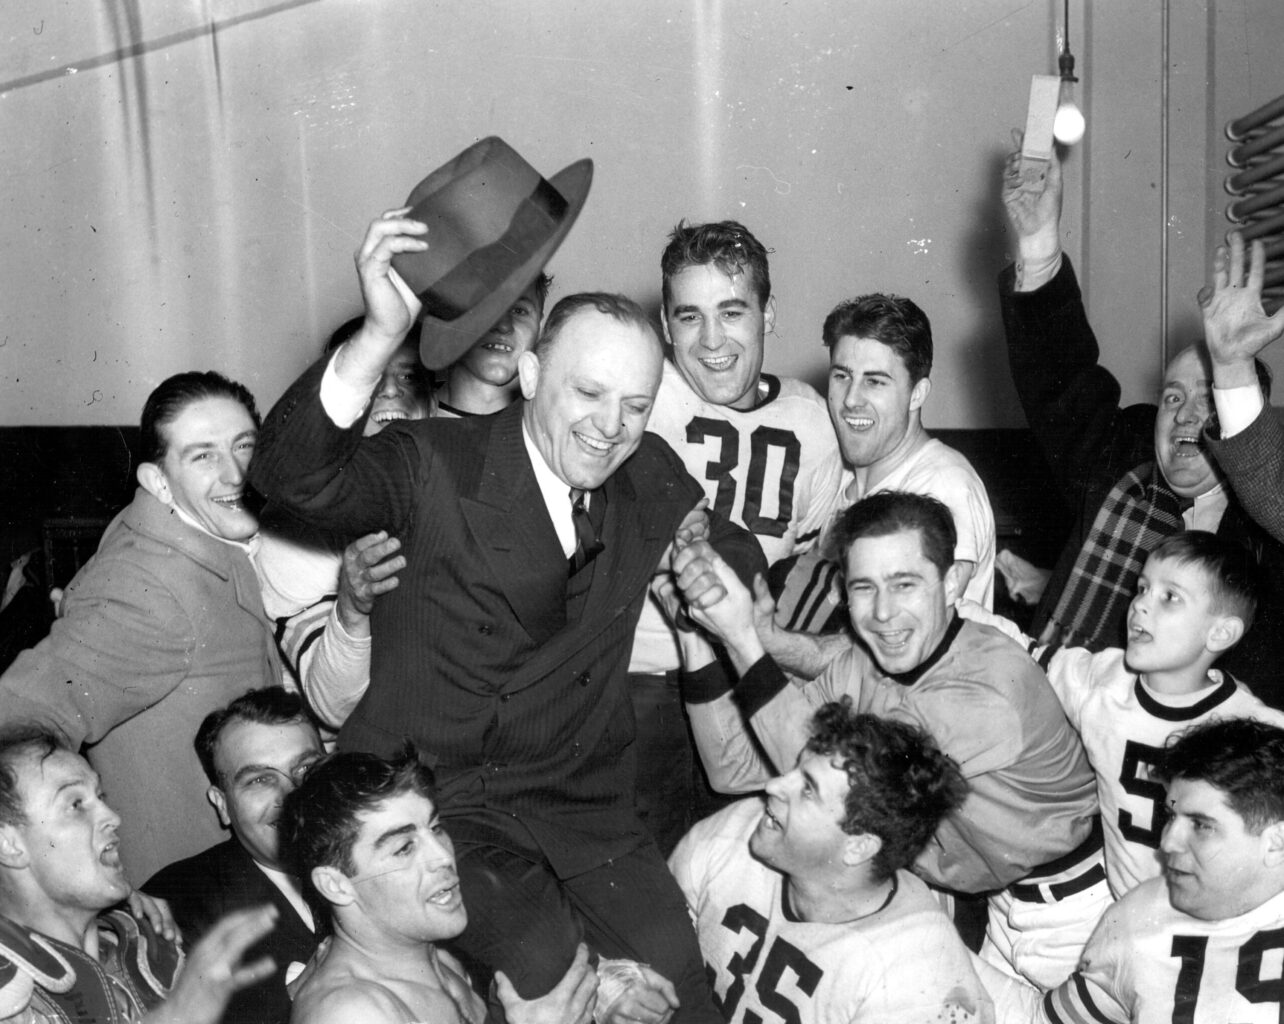 Bears owner and coach George Halas is hoisted on shoulders of players in the dressing room after the team beat the Washington Redskins 73-0 in the 1940 NFL Championship game. Photo credit: Pro Football Hall of Fame